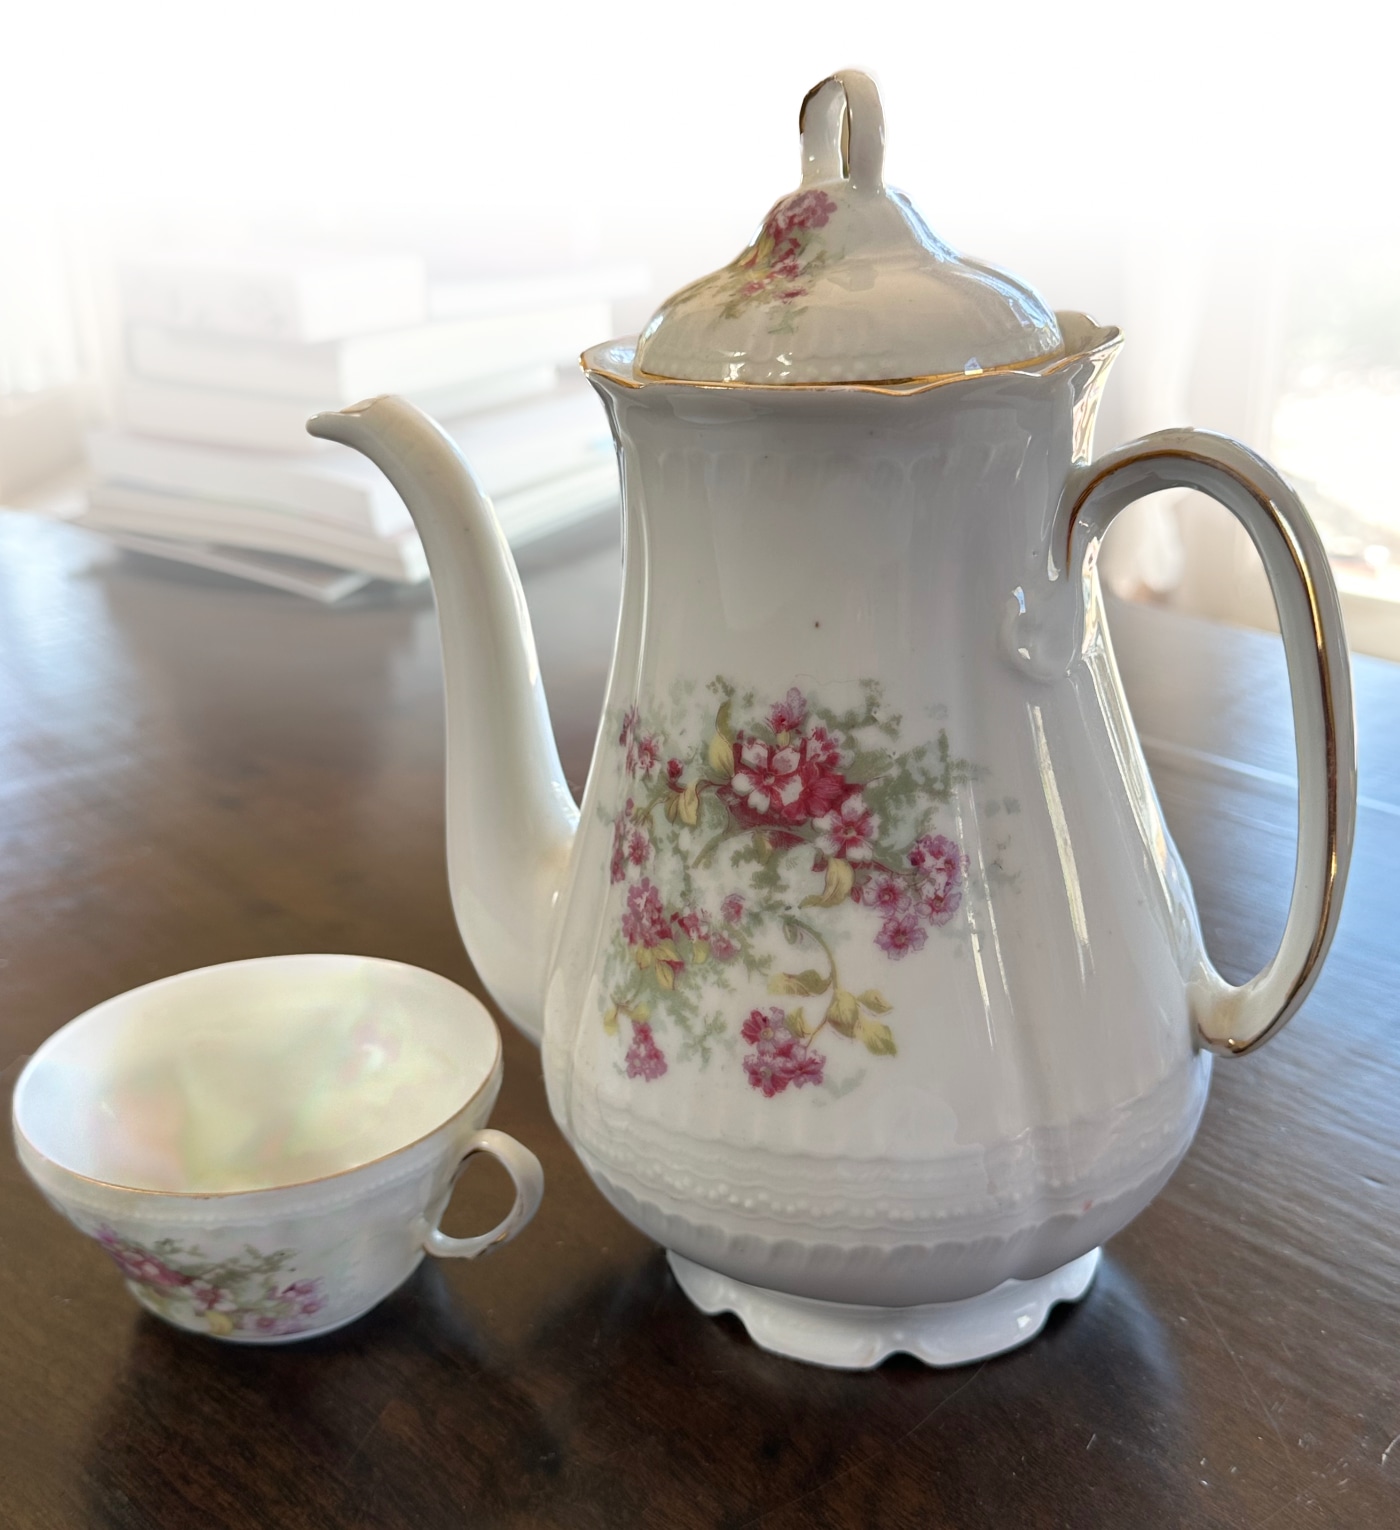 On a brown wooden table sits a tall white porcelain teapot with a lid and long spout. The teapot is decorated on the side with a small cluster of dark red flowers, and gilded on the rim and along the handle in gold. Next to it is a teacup with similar decorations. The background fades to white in the top half of the photo, making the teacup and teapot stand out from the background as if emerging from the photograph.